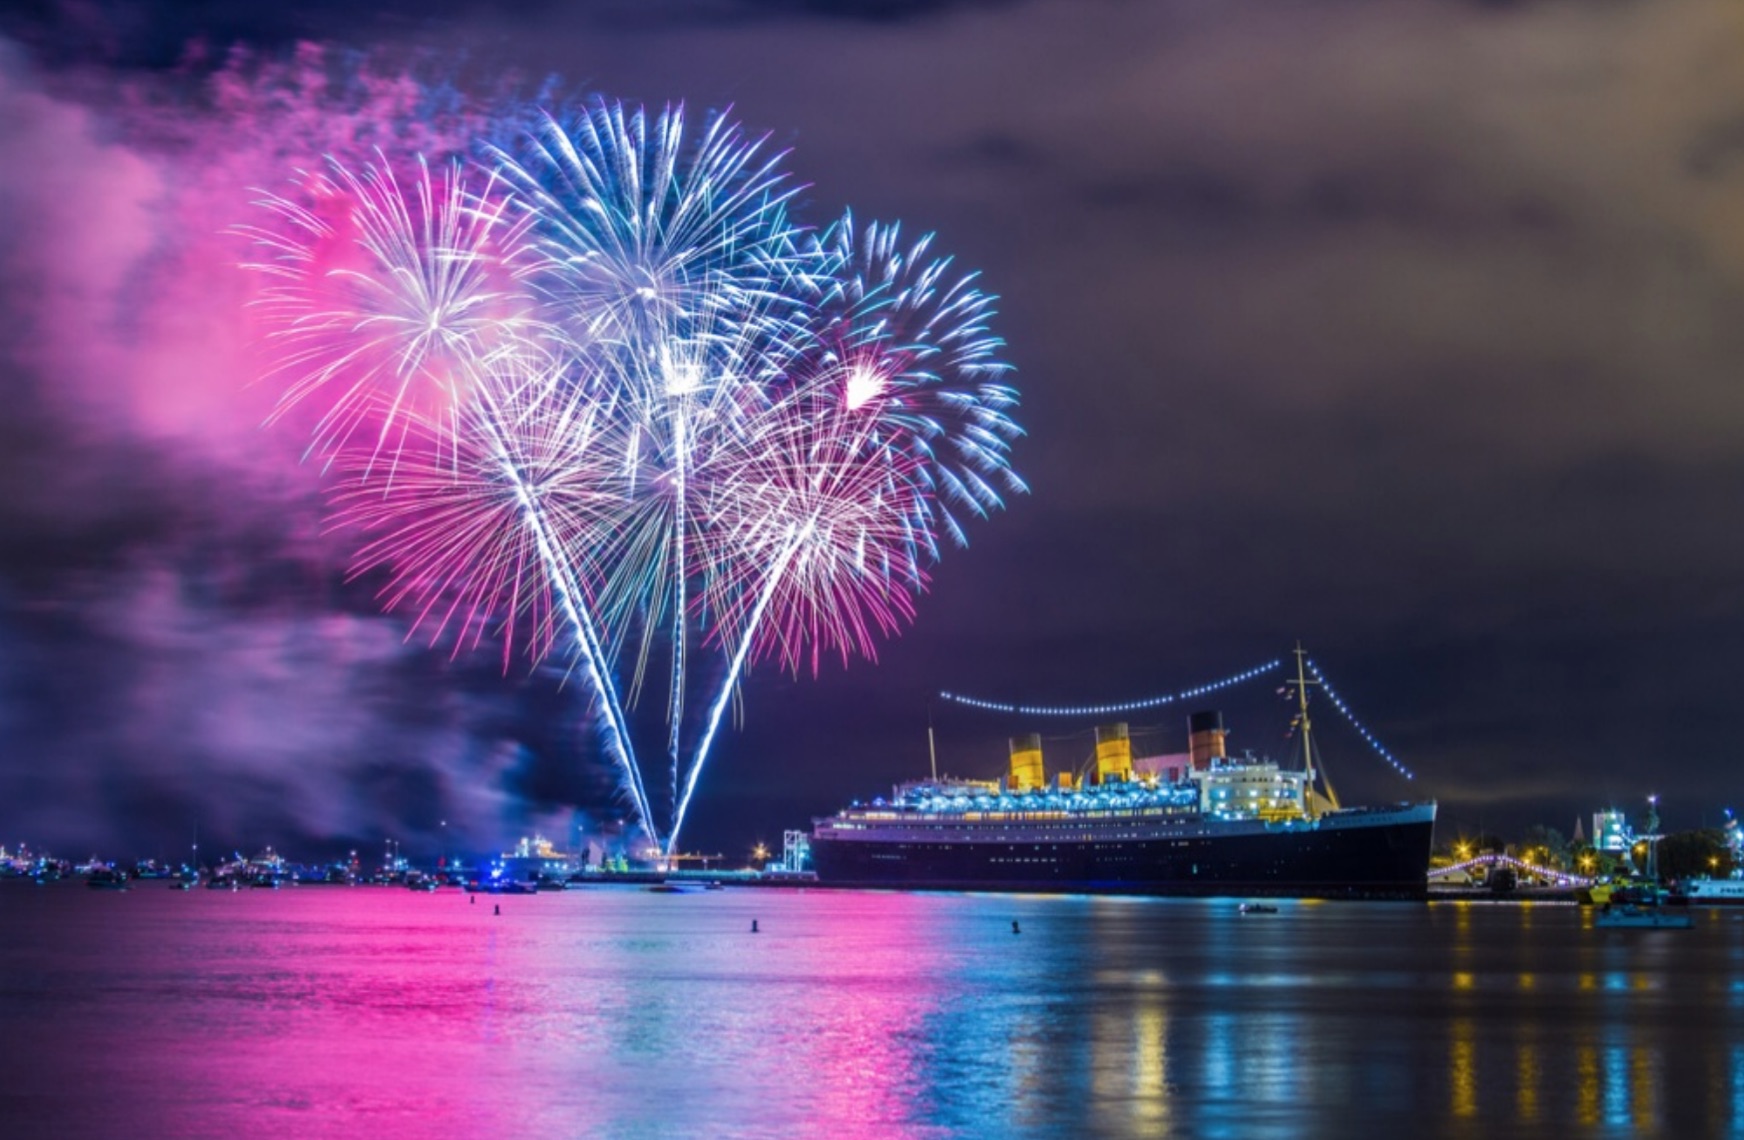 queen Mary, New Years eve 2018